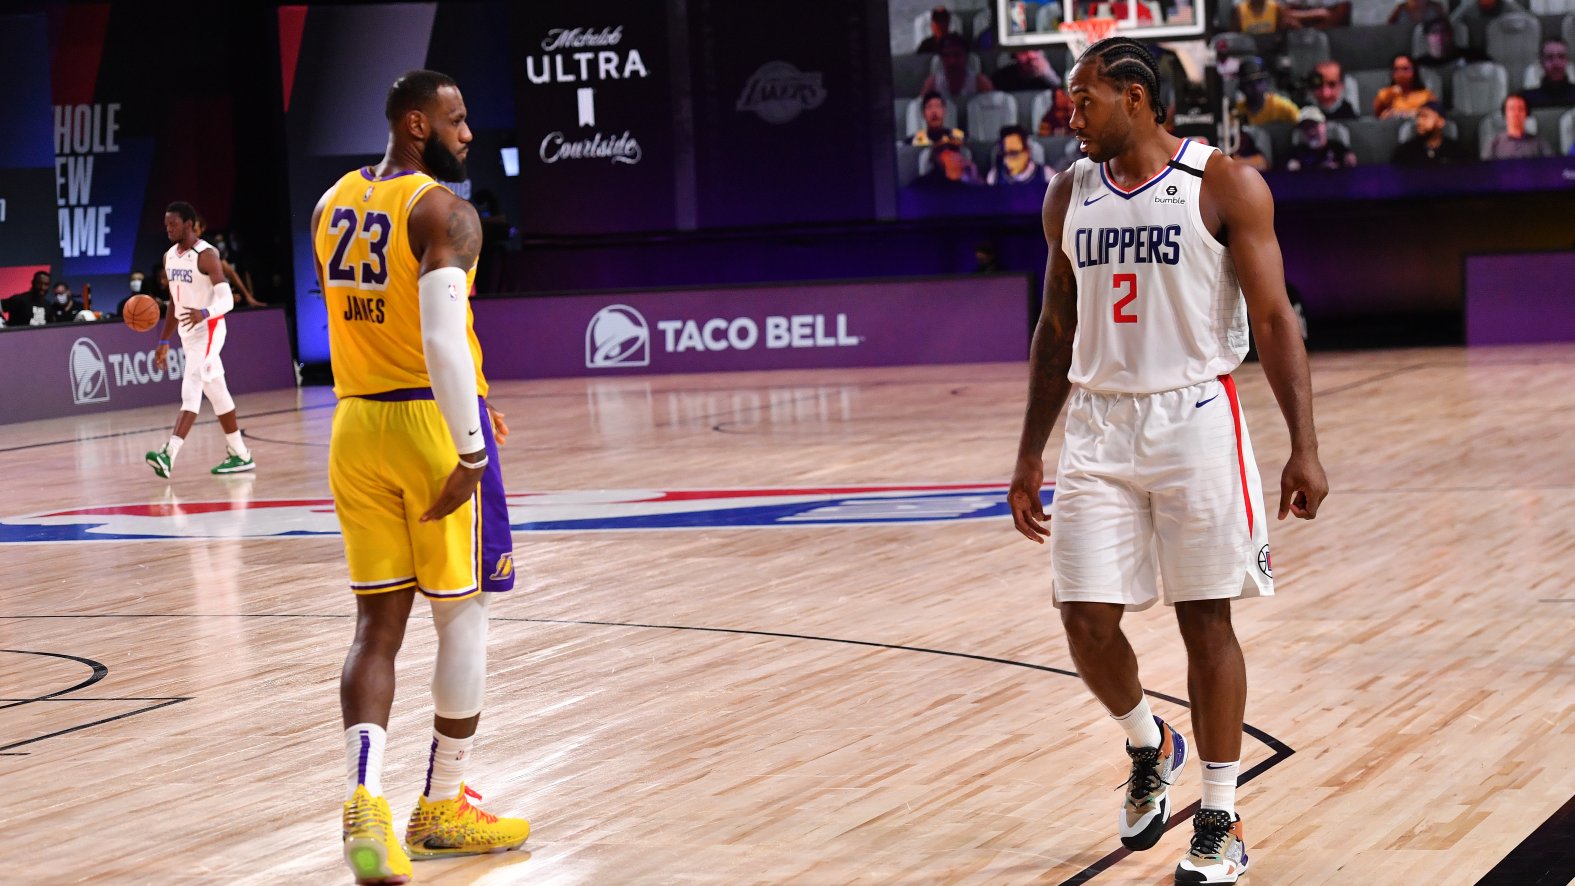 The NBA Returned the Same Way it Began: Clippers versus Lakers in the